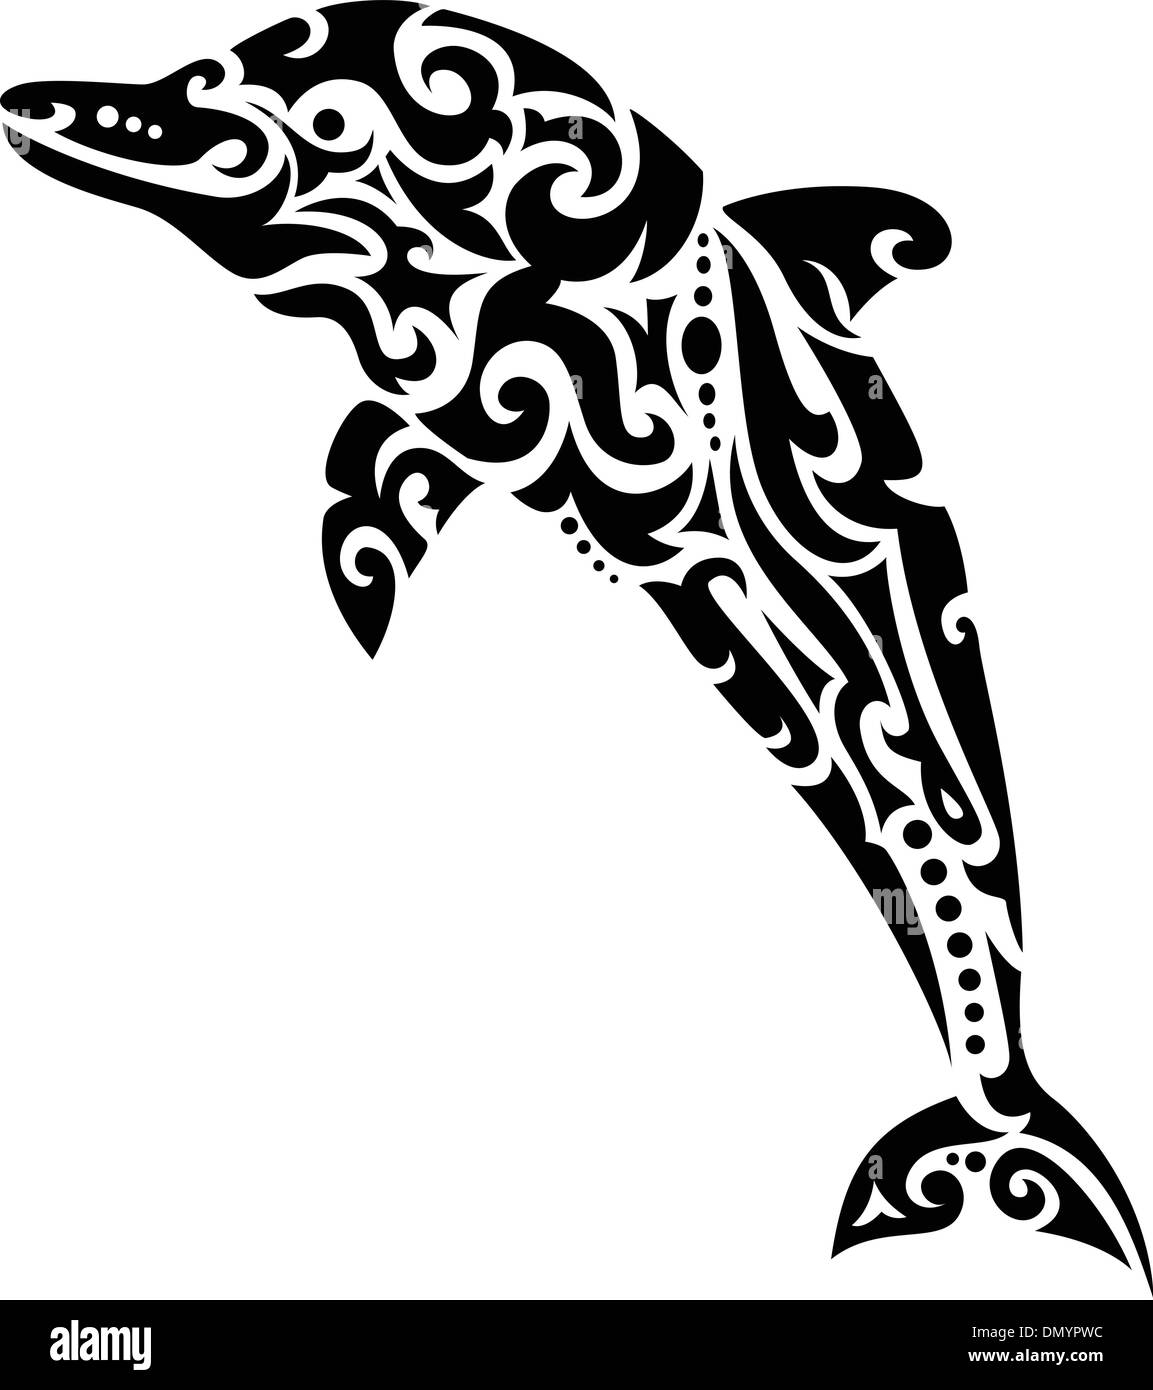 Sketch work dolphin tattoo on the upper arm.